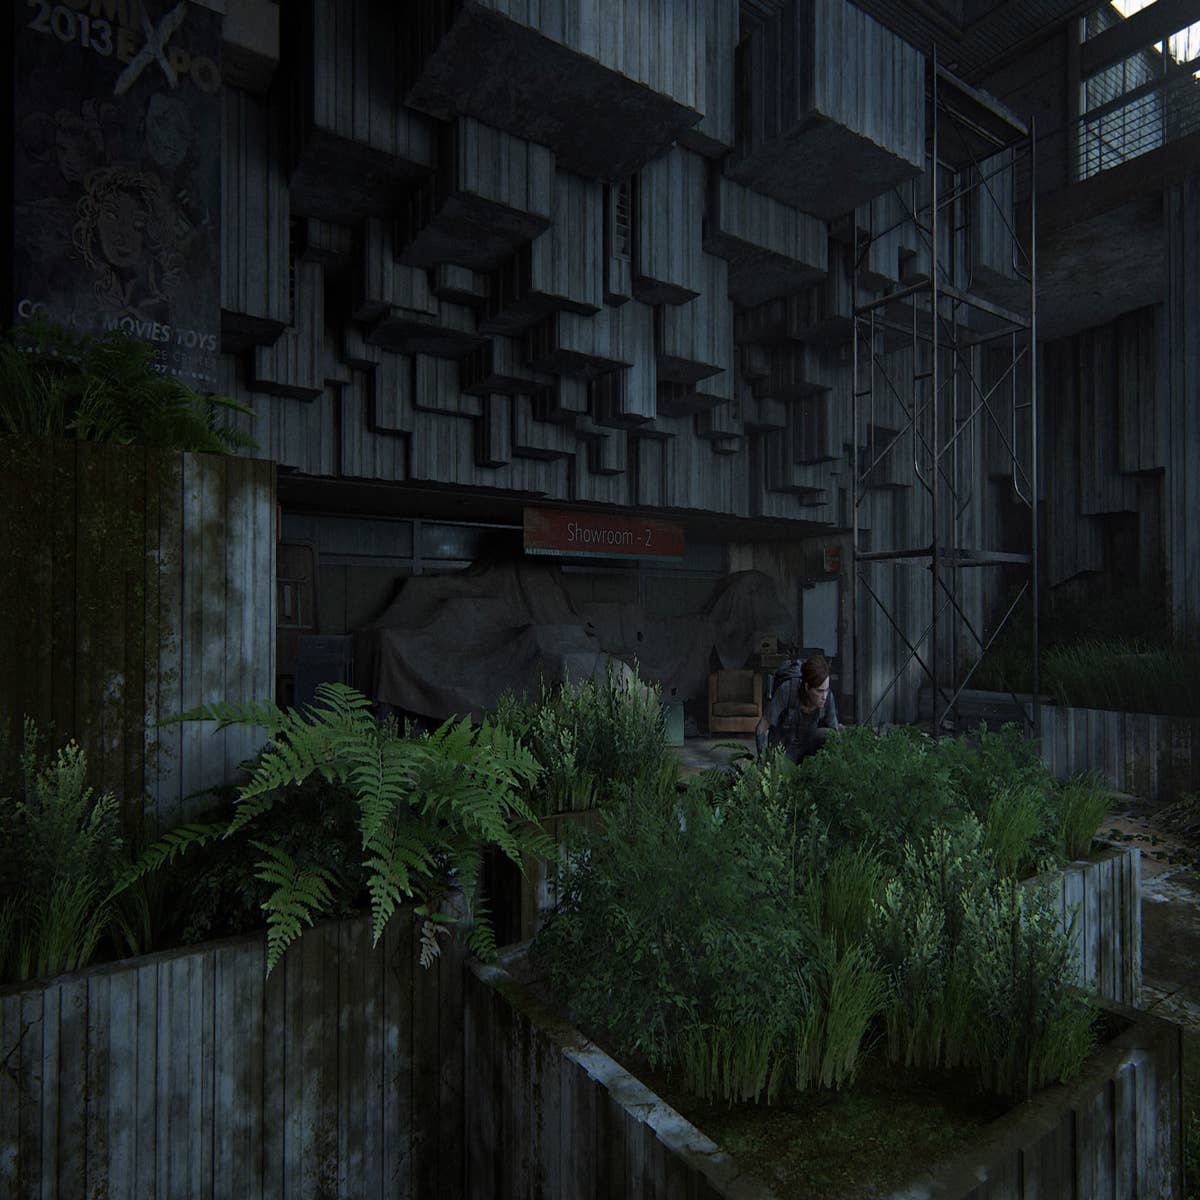 Architecture in The Last of Us part 2 - post apocalyptic Seattle